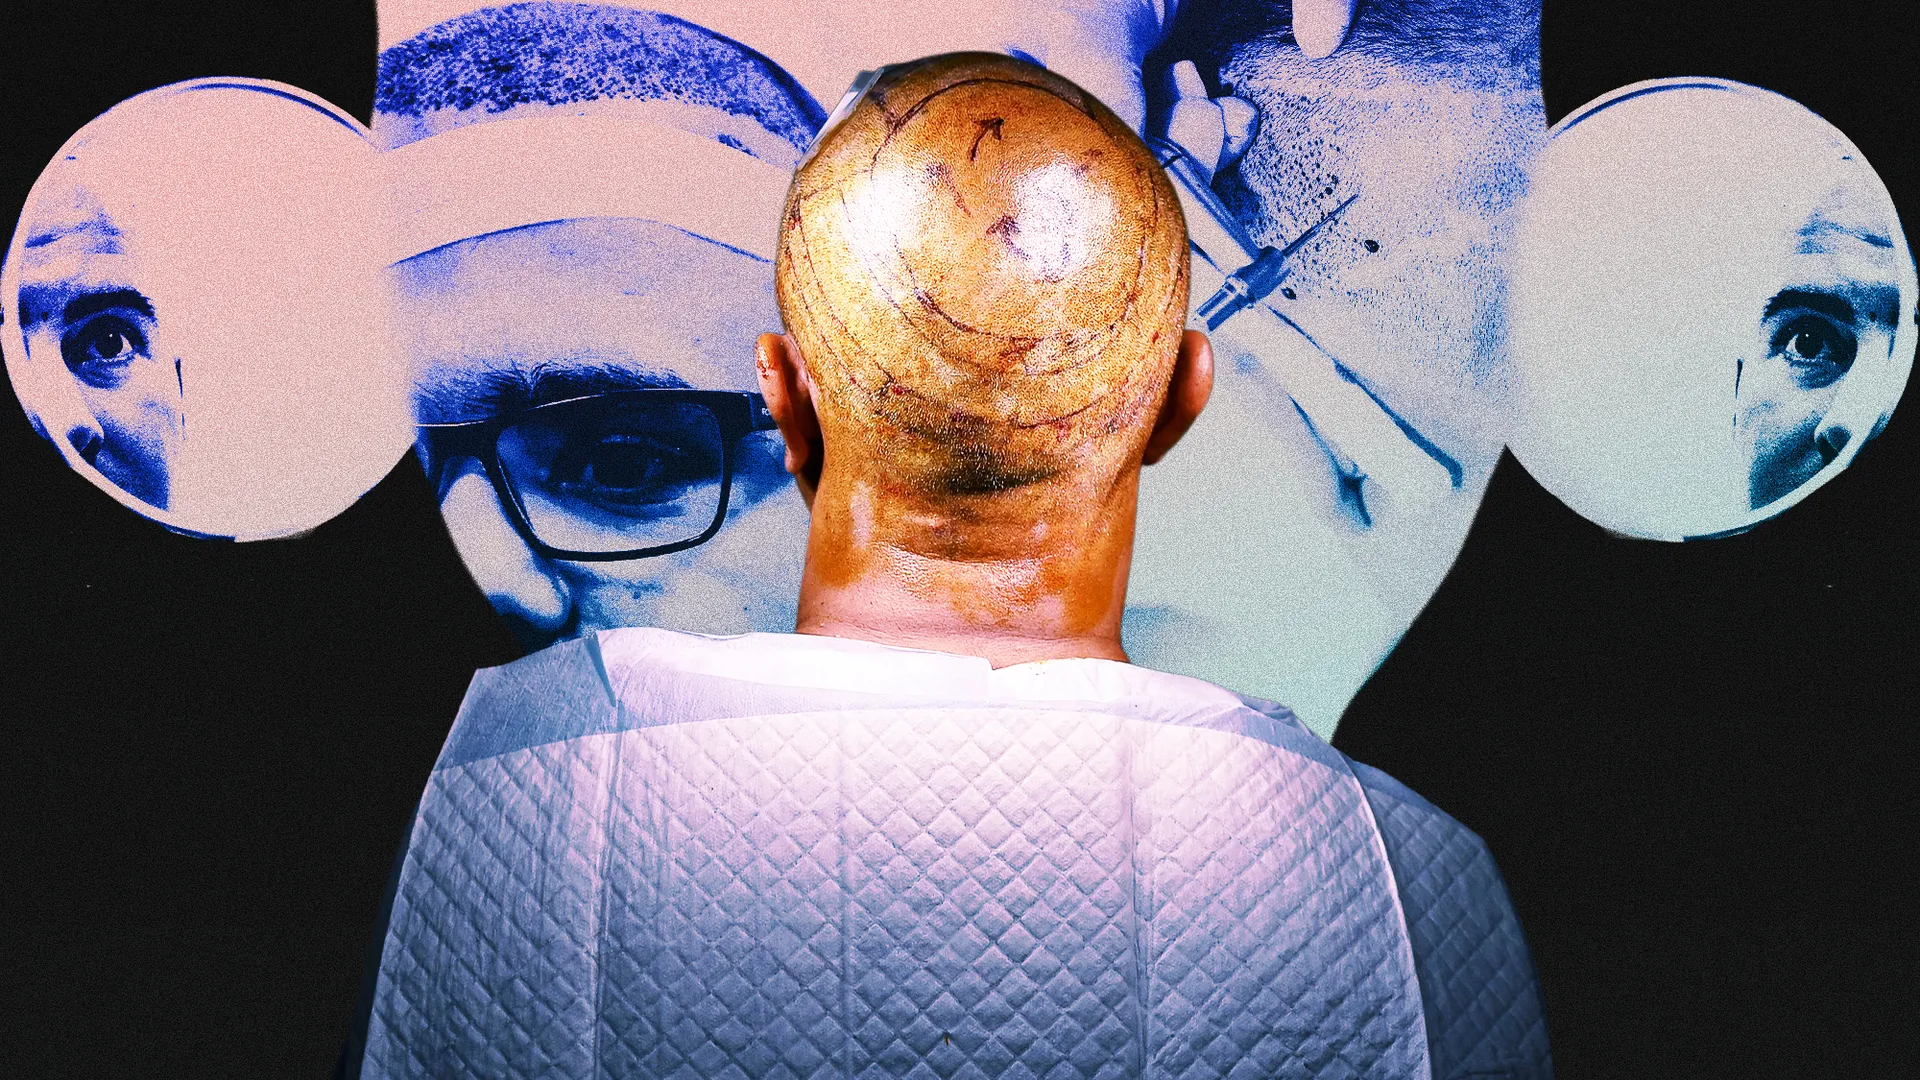 I got a cheap hair transplant in Turkey, the recovery was agony, and I'd do it again in a heartbeat